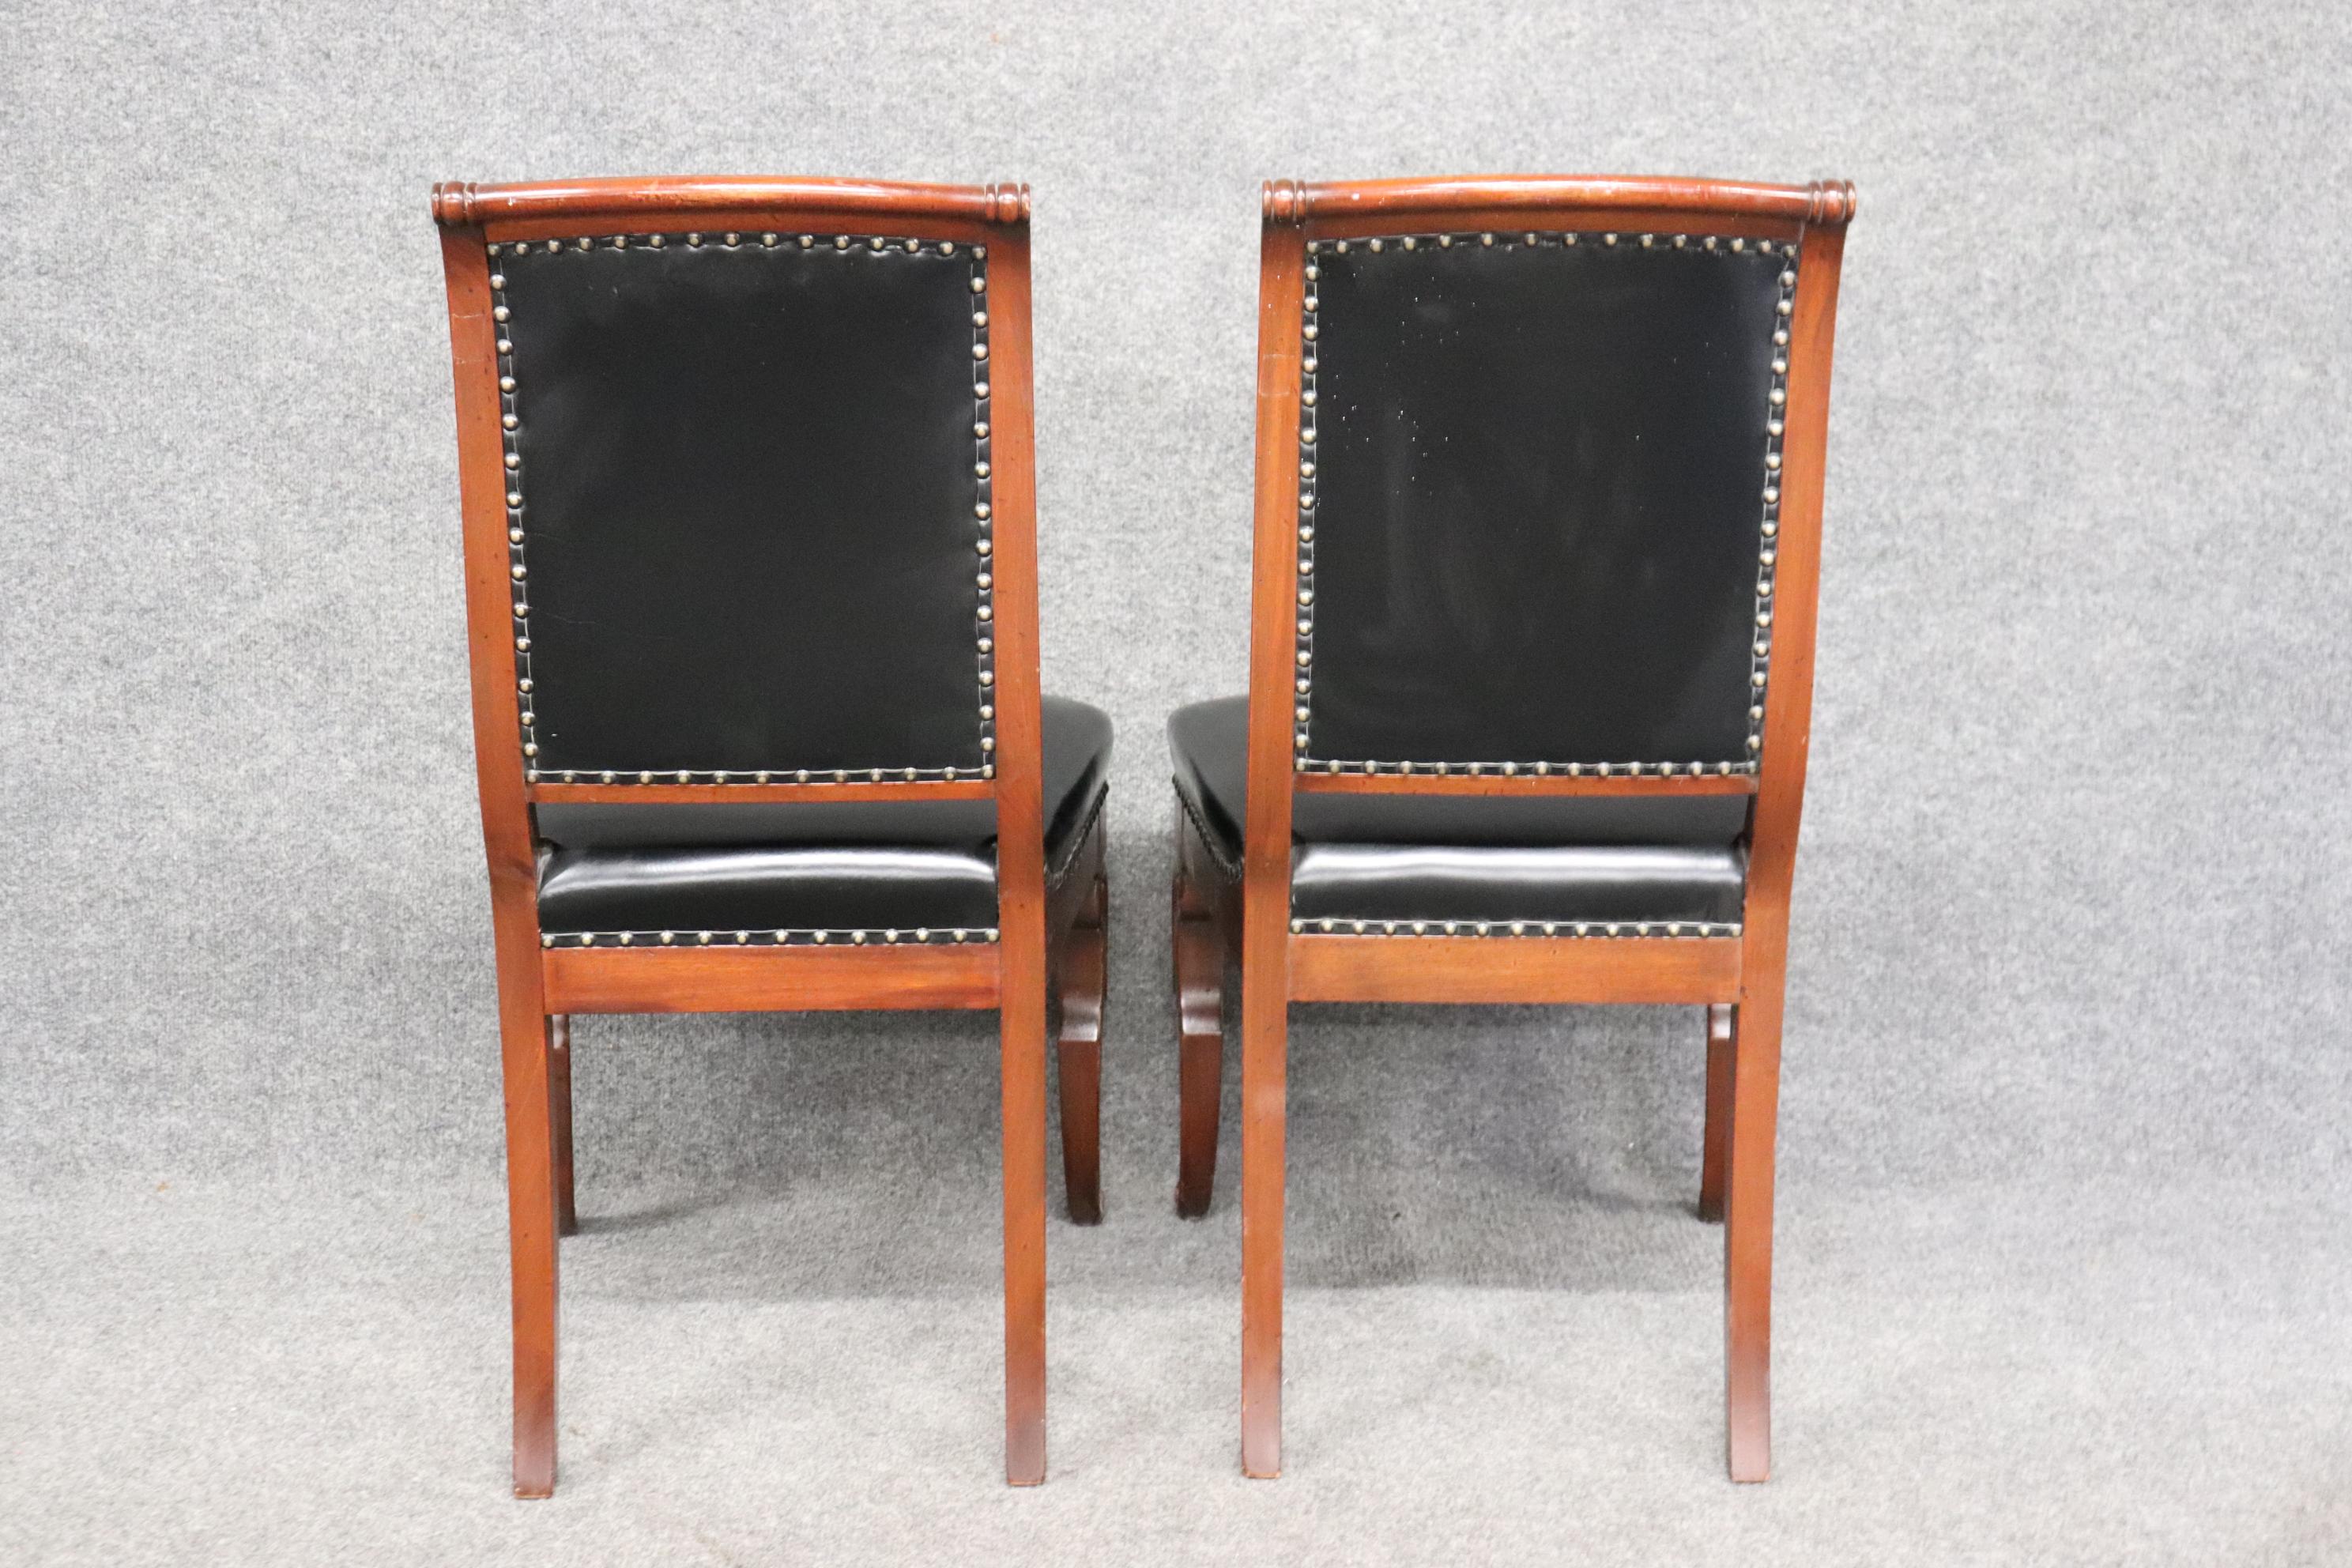  Four Late 19th Century Regency Dining Chairs By Jean Selme For Maison Jansen In Good Condition For Sale In Swedesboro, NJ